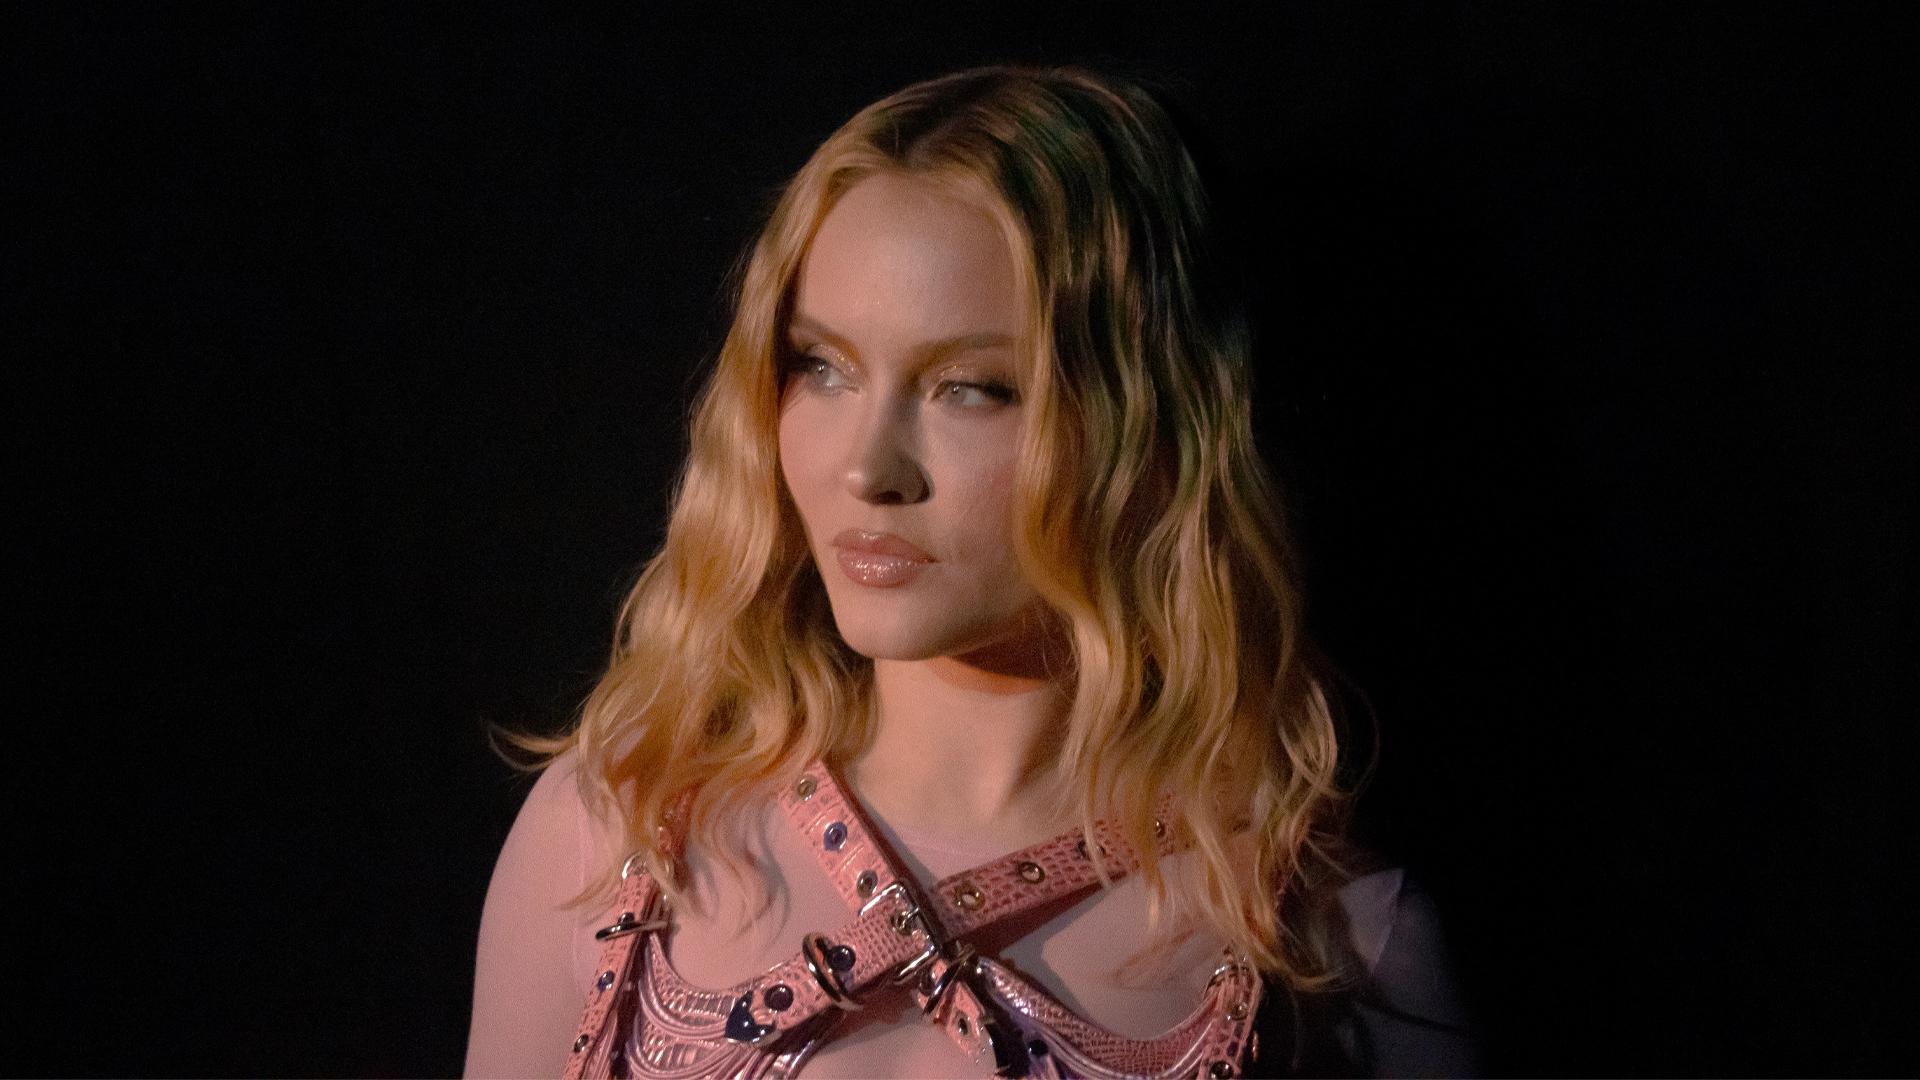 Zara Larsson in a pink outfit against a dark background.